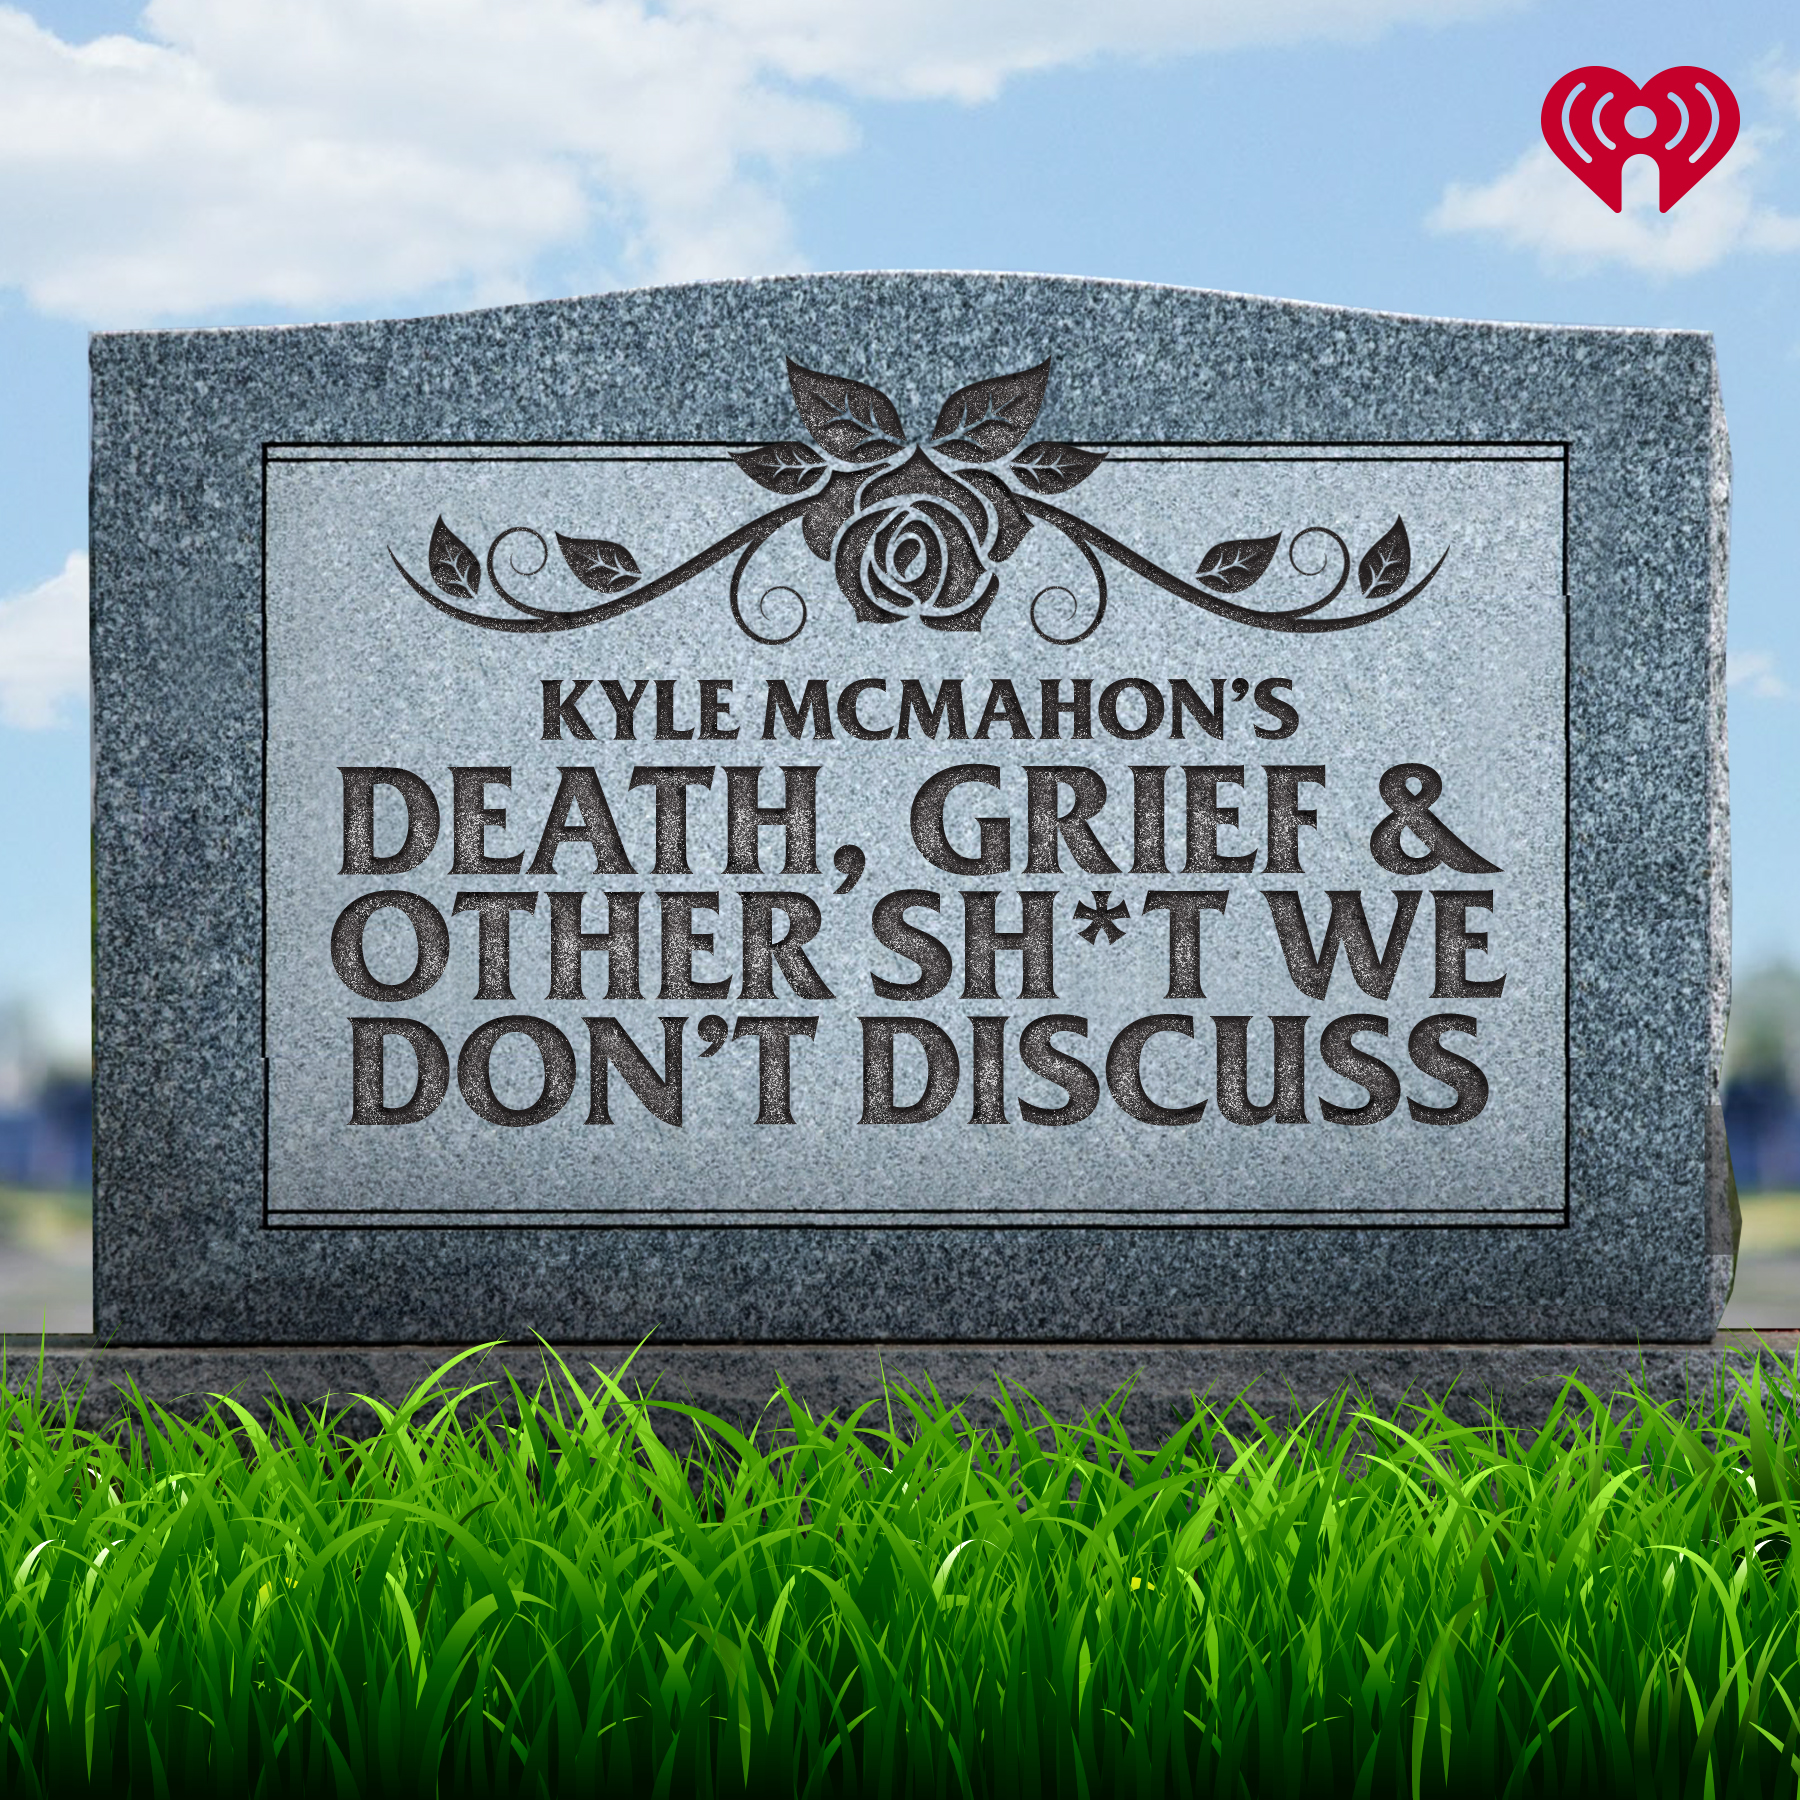 Introducing Death, Grief, & Other Sh*t We Don’t Discuss